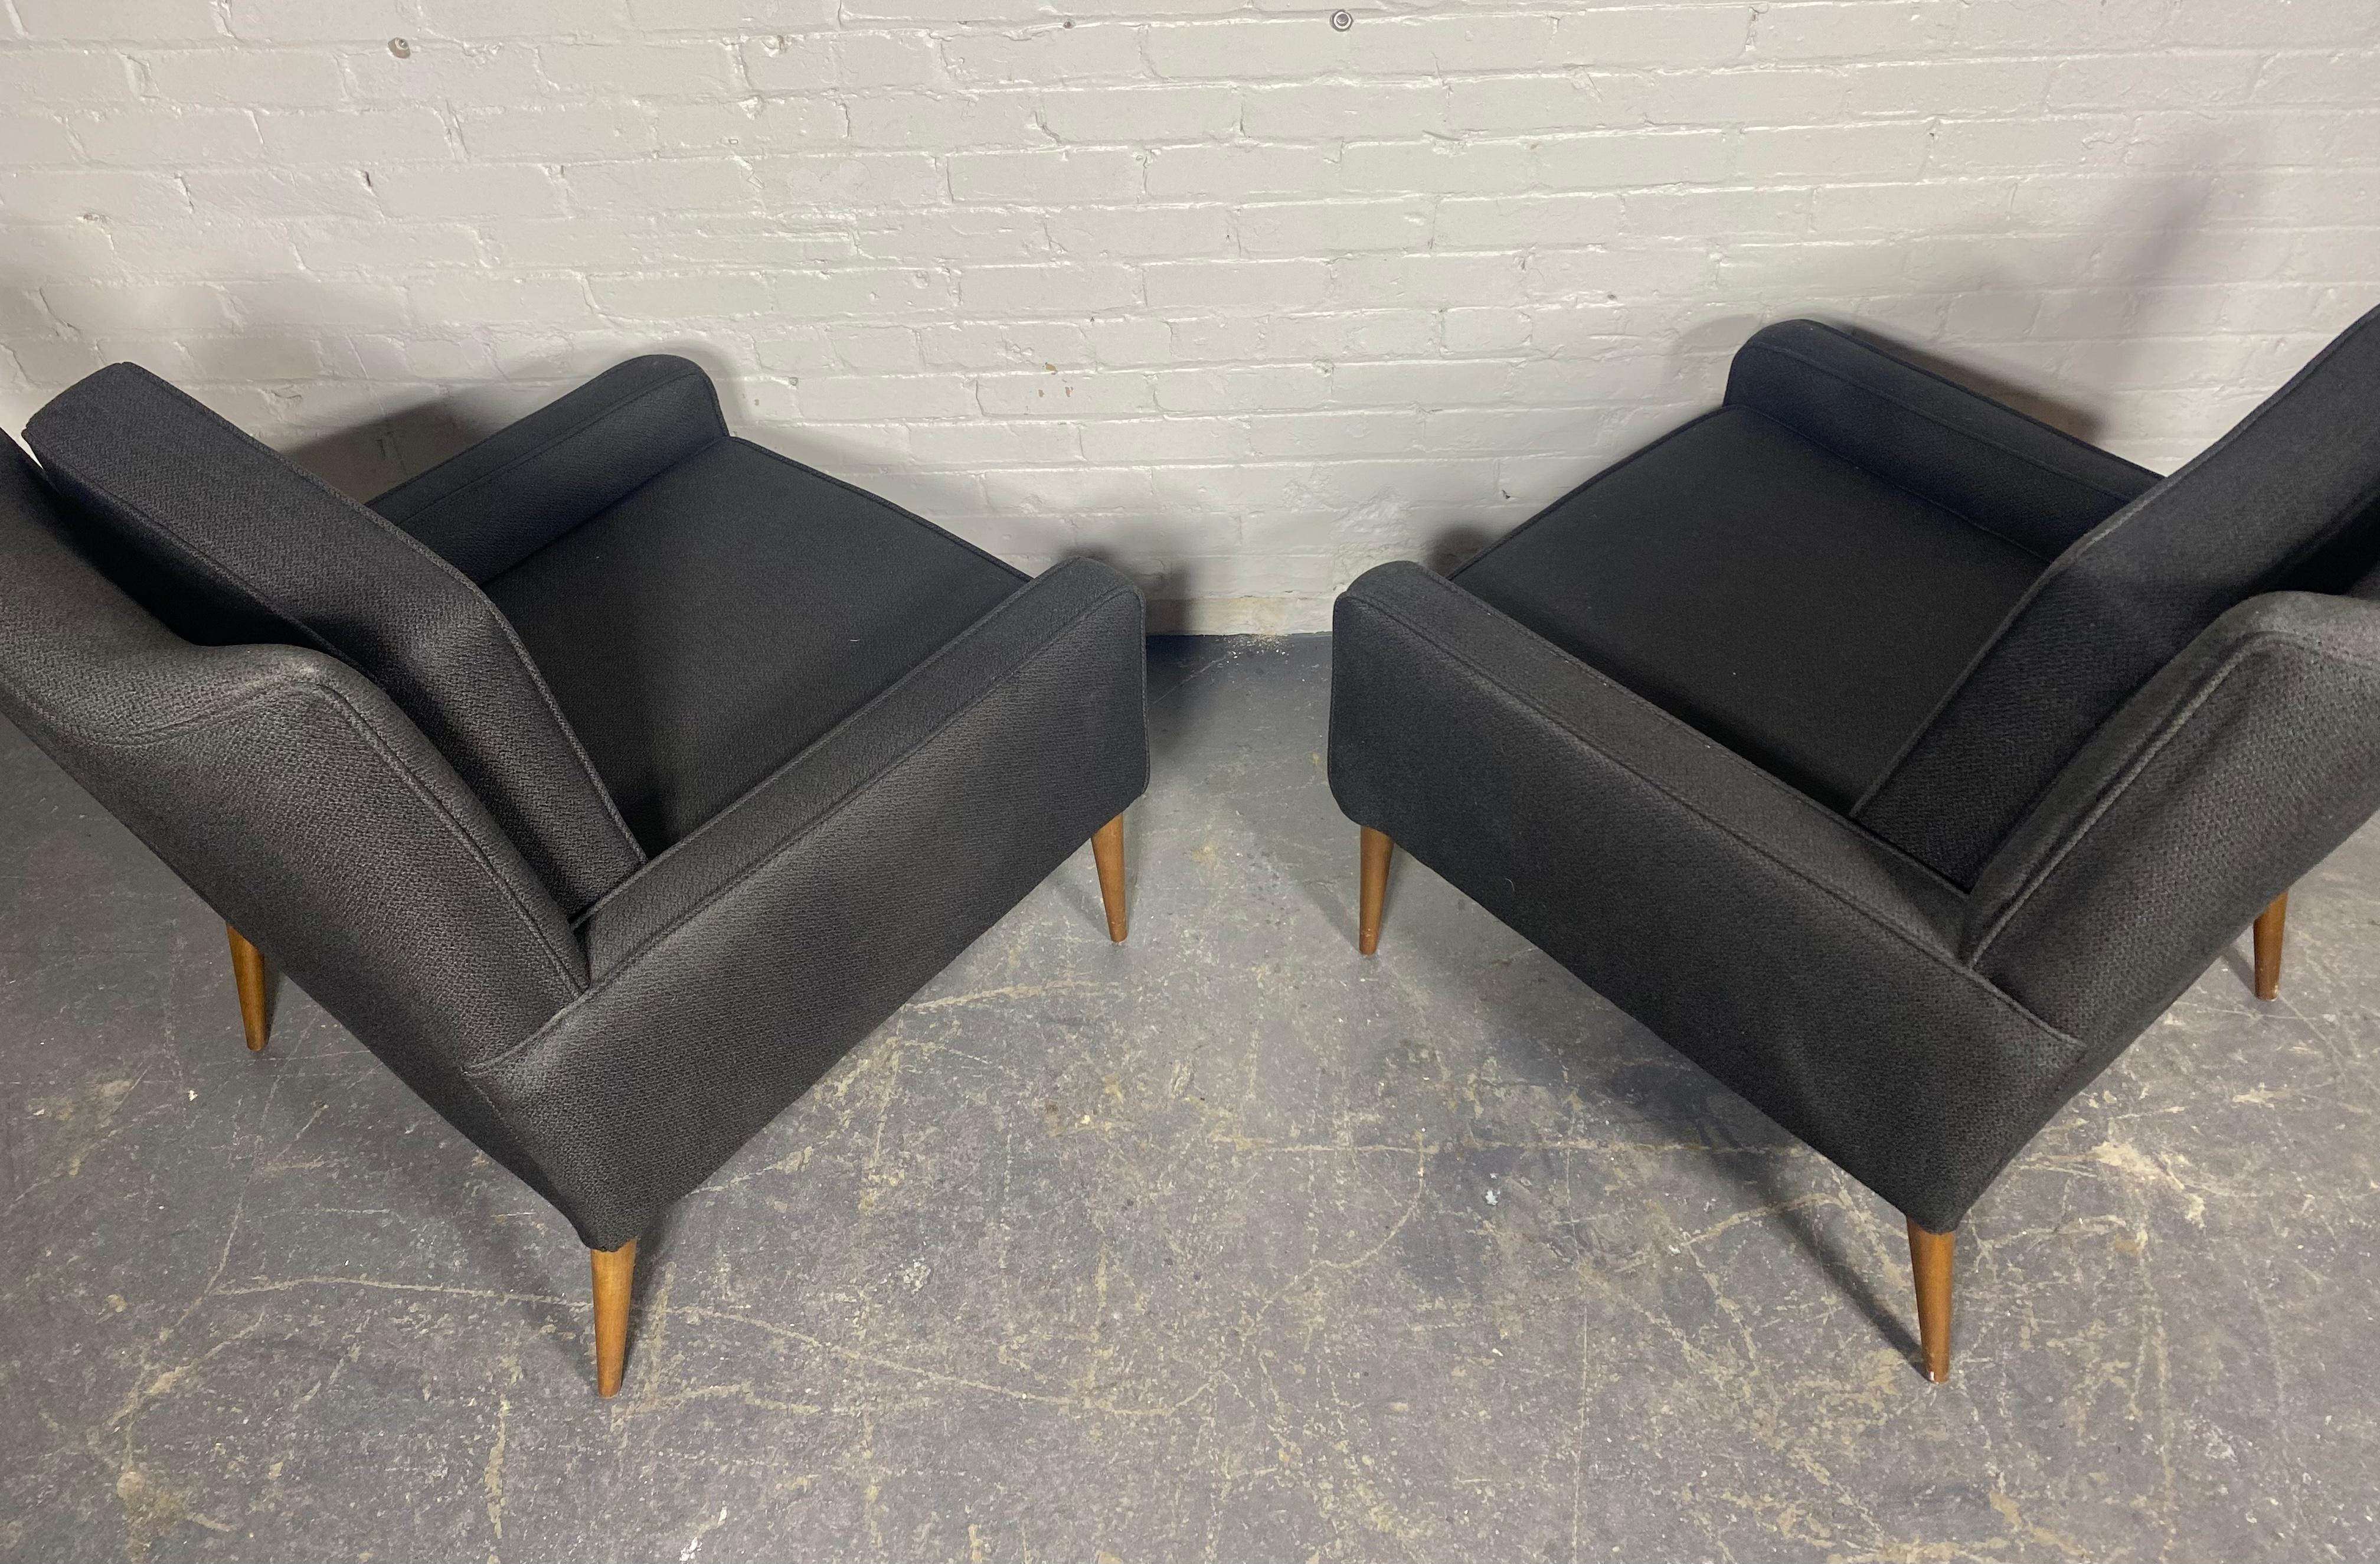 Classic Pair Modernist Lounge Chairs attributed to Paul McCobb / Directional For Sale 3